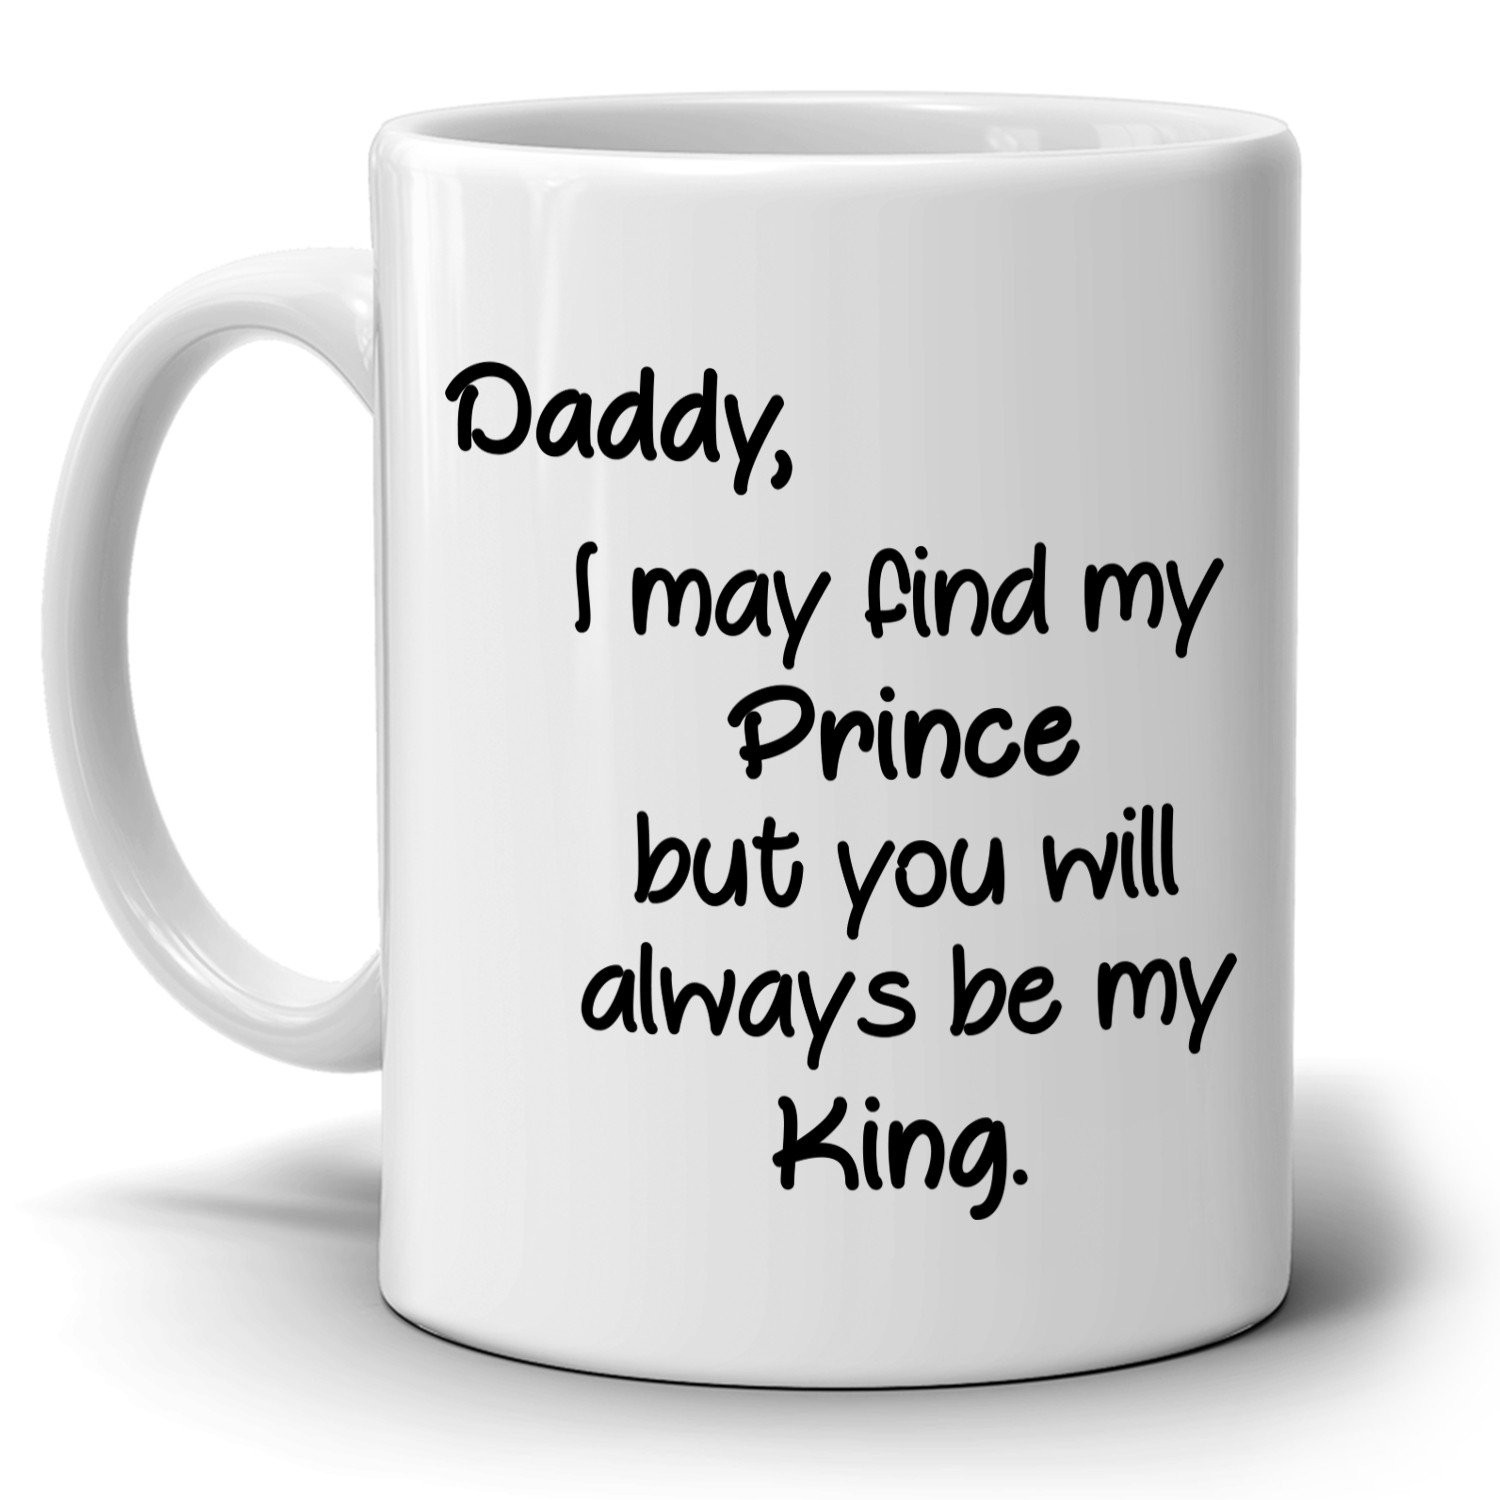 Dad Birthday Gifts From Daughter
 Daddy Birthday Gifts From Daughter Fathers Day Gift for